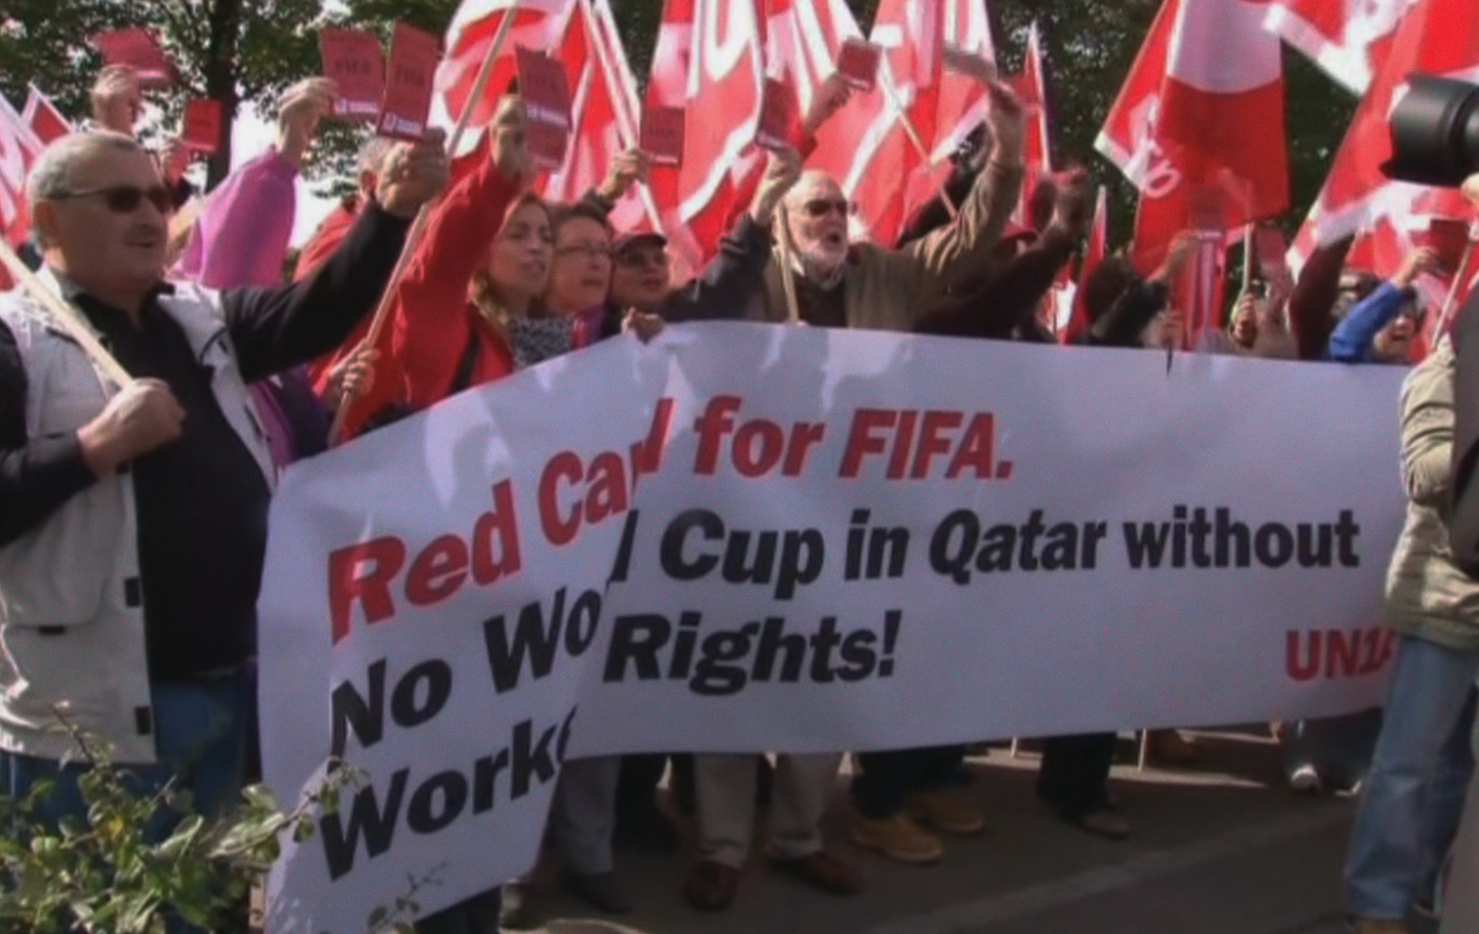 Protesters rallying again fifa holding the world cup in qatar after their alledged human rights abuses